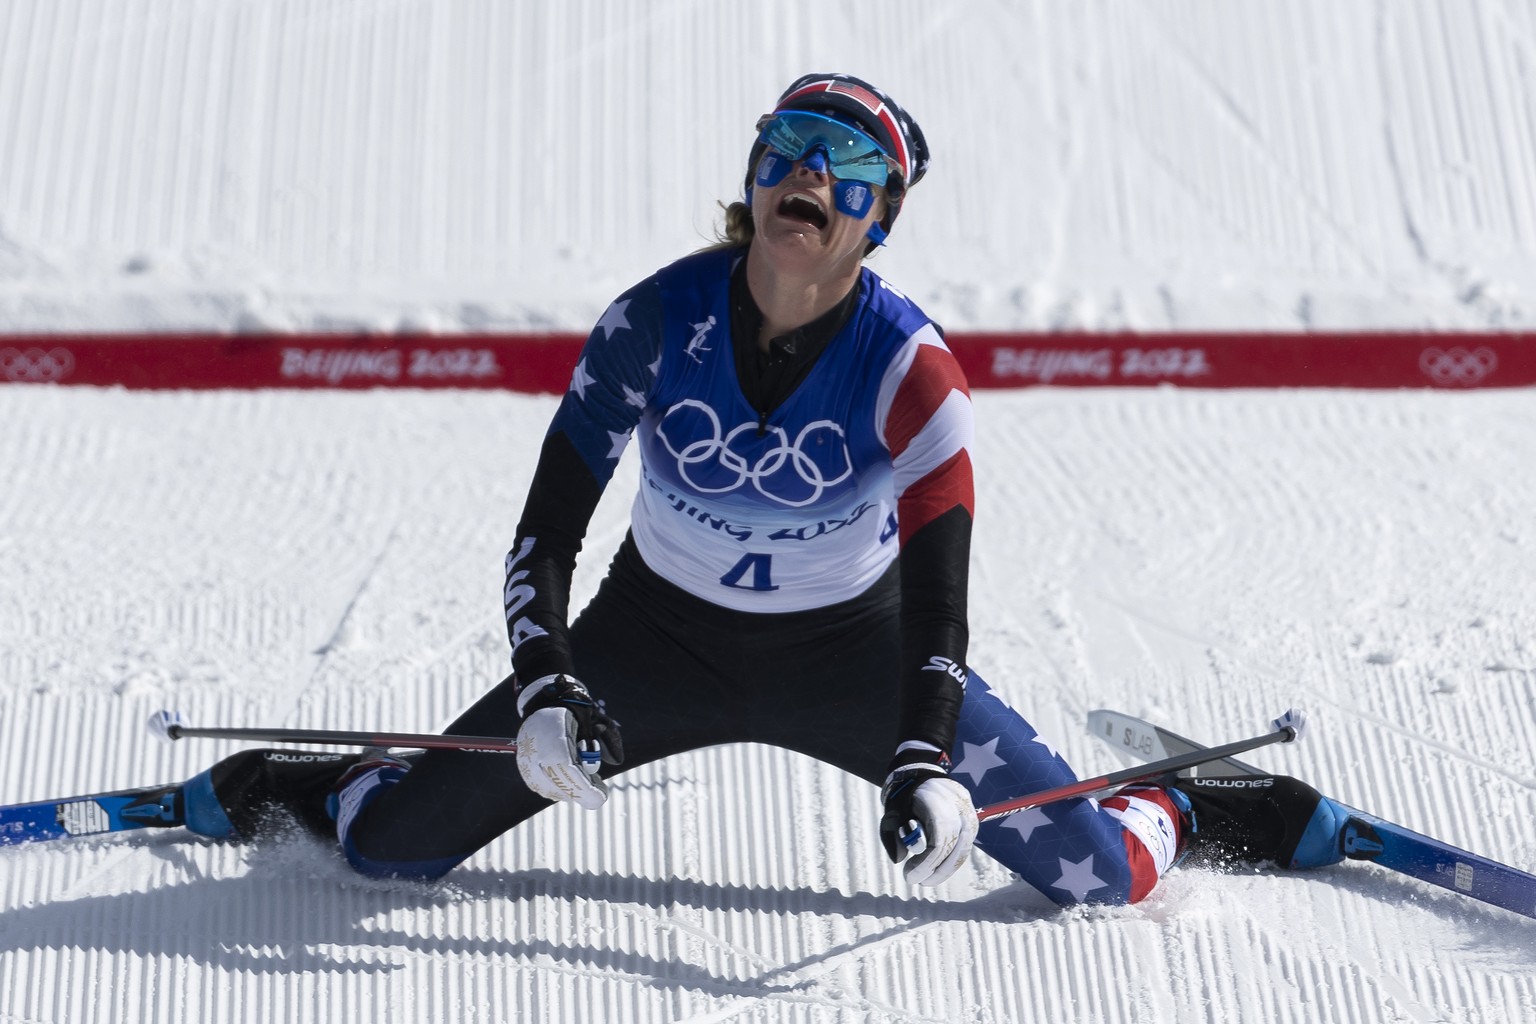 Silver medal winner Jessie Diggins of USA falls on the ground in the finish area during the women&#039;s cross-country skiing 30km Mass Start at the 2022 Winter Olympics in Zhangjiakou, China, on Sund ...